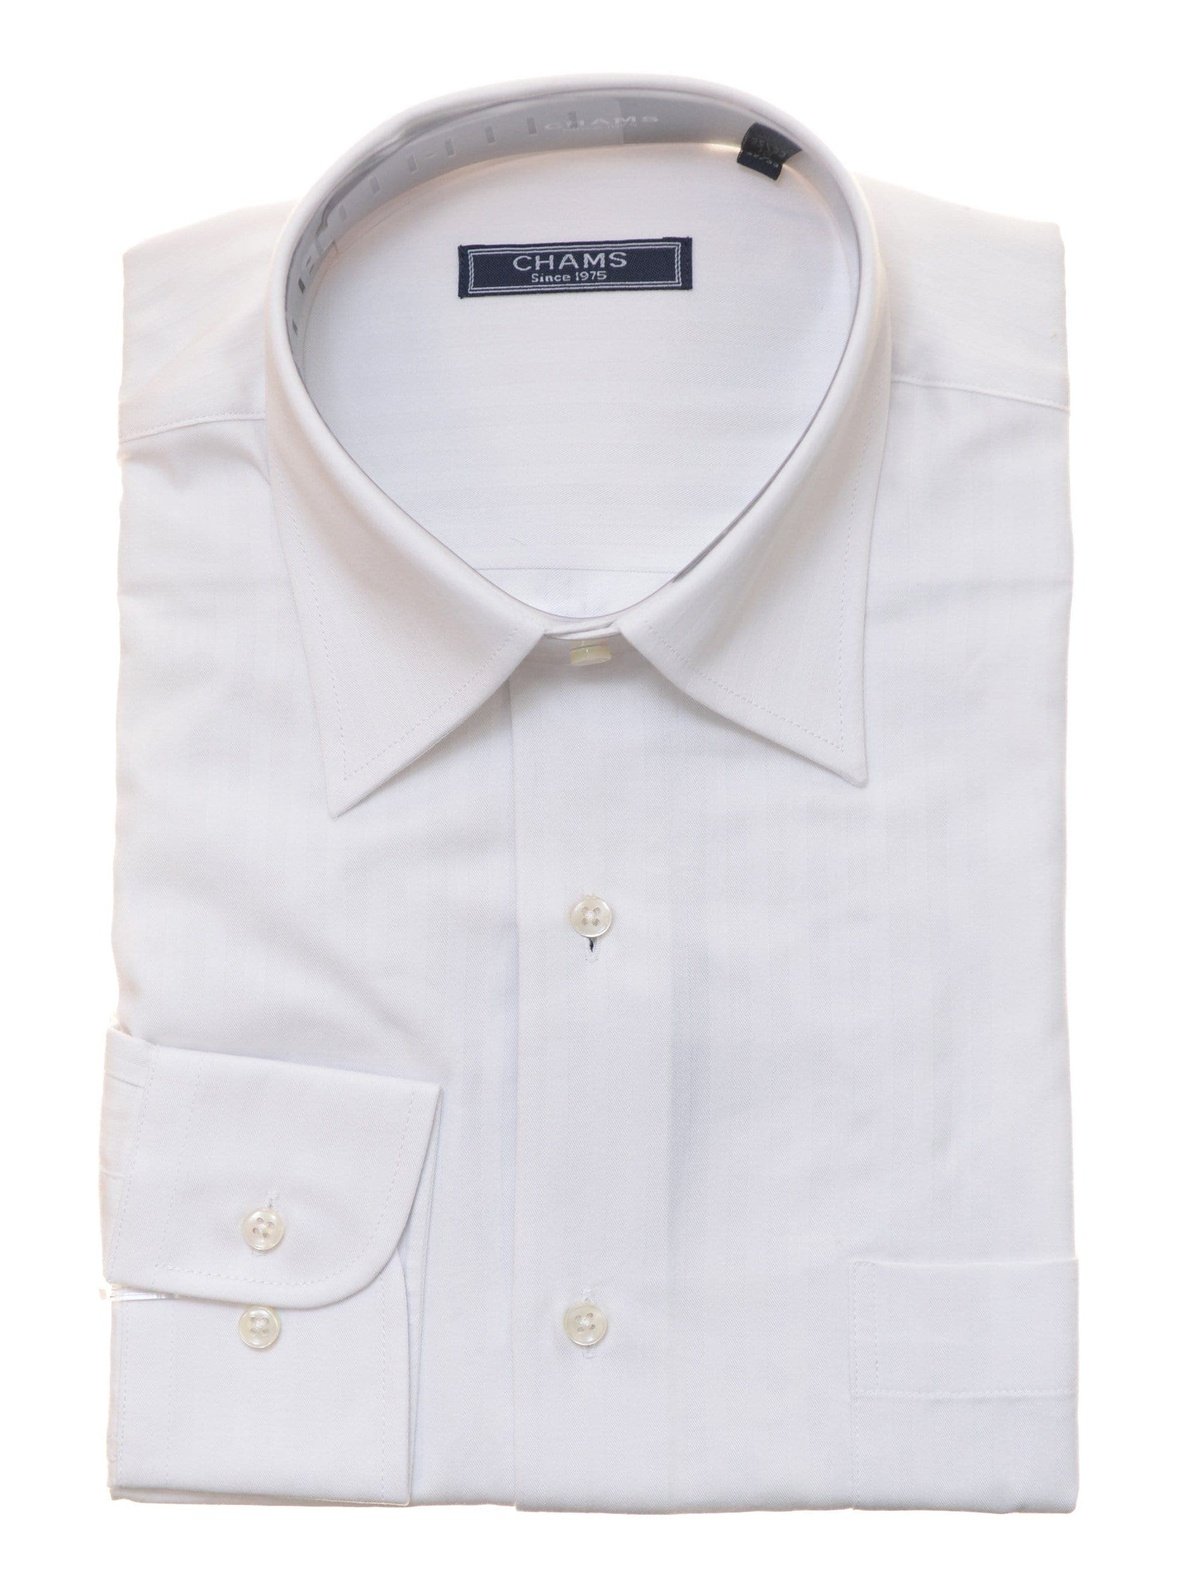 Chams SHIRTS 14 1/2 32/33 Chams Classic Fit White Tonal Striped Fine Combed Cotton Dress Shirt